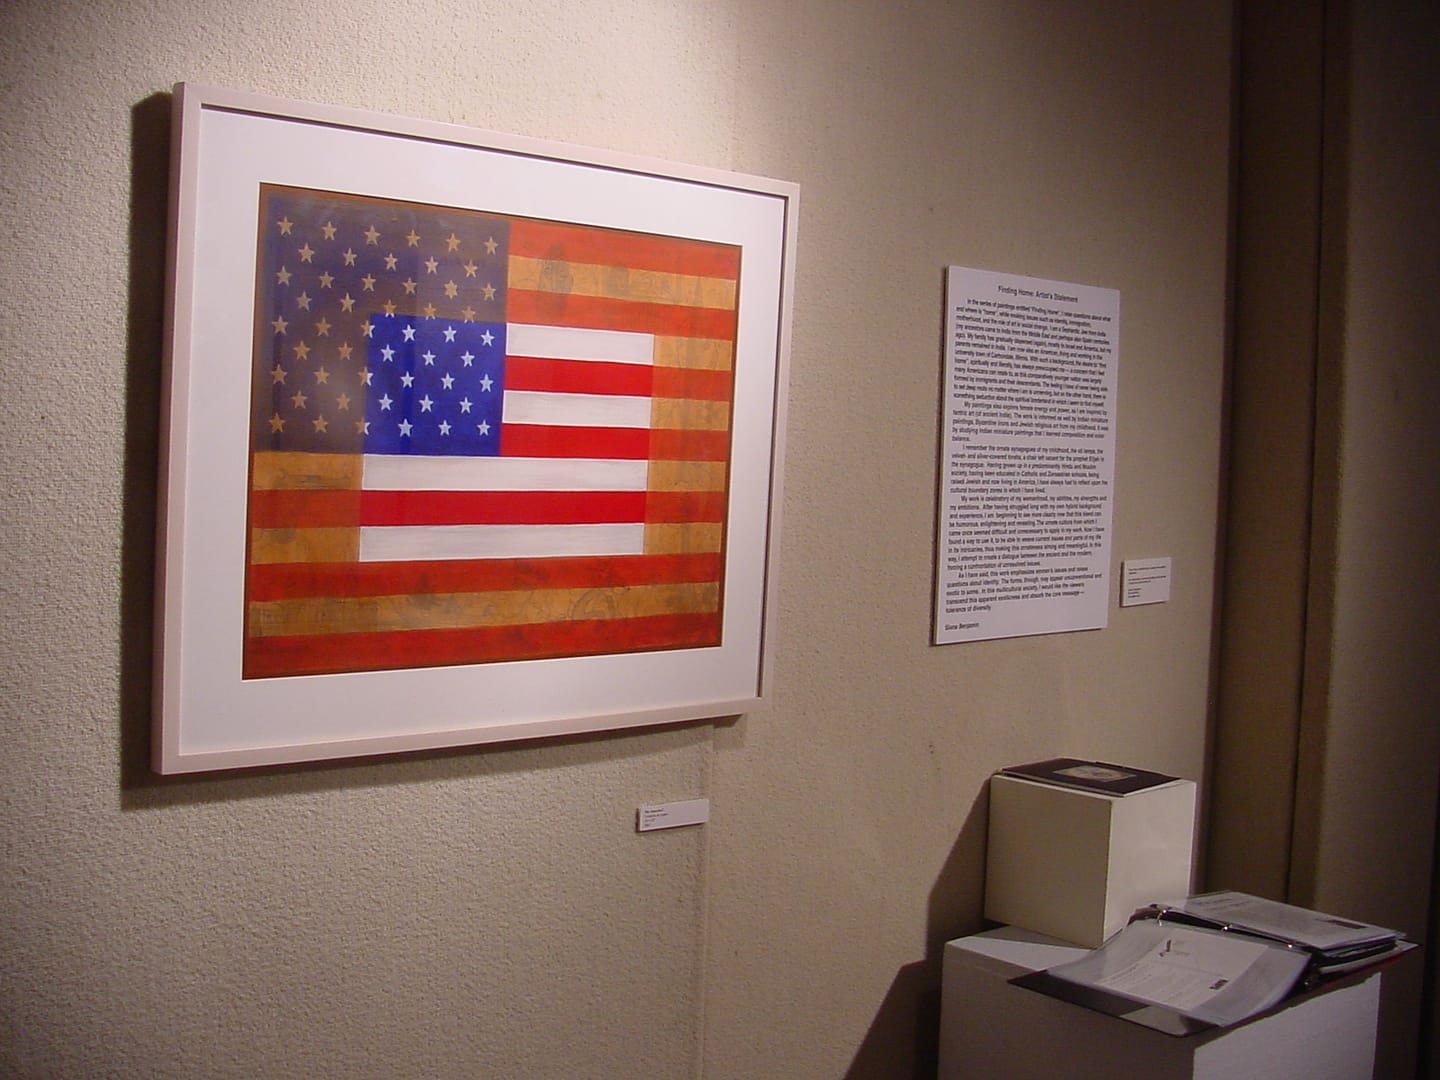 My America, 28” x 34 Flag painting, Mixed Media 2001